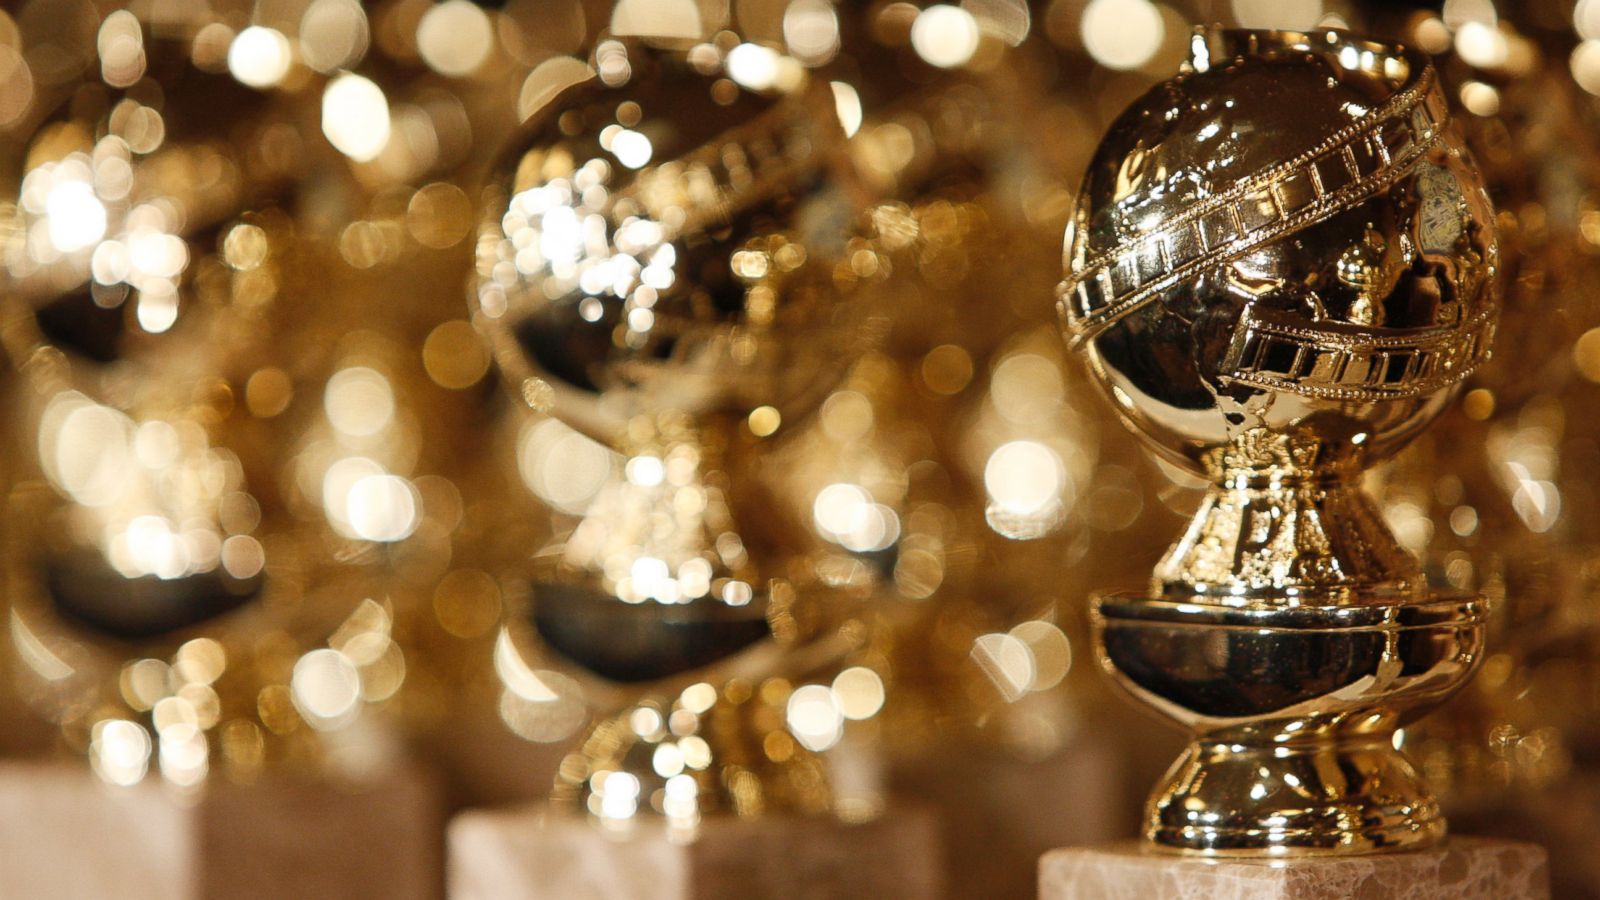 The Golden Globes offer a first look at who will take home the Academy Award